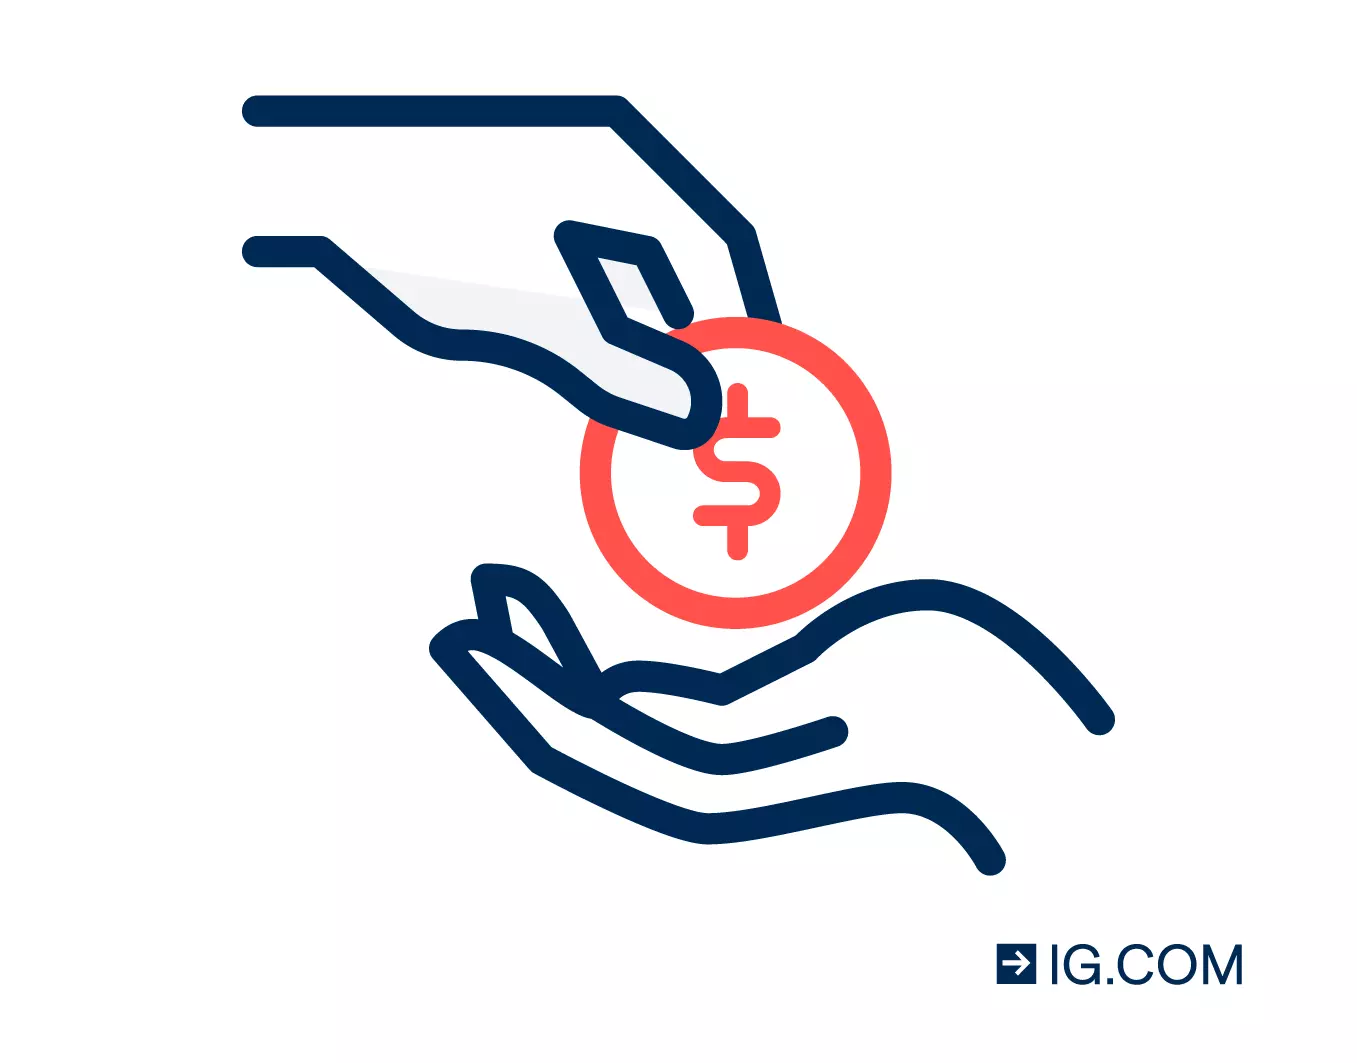 Image of two hands exchanging a coin. On the coin is the dollar currency symbol.